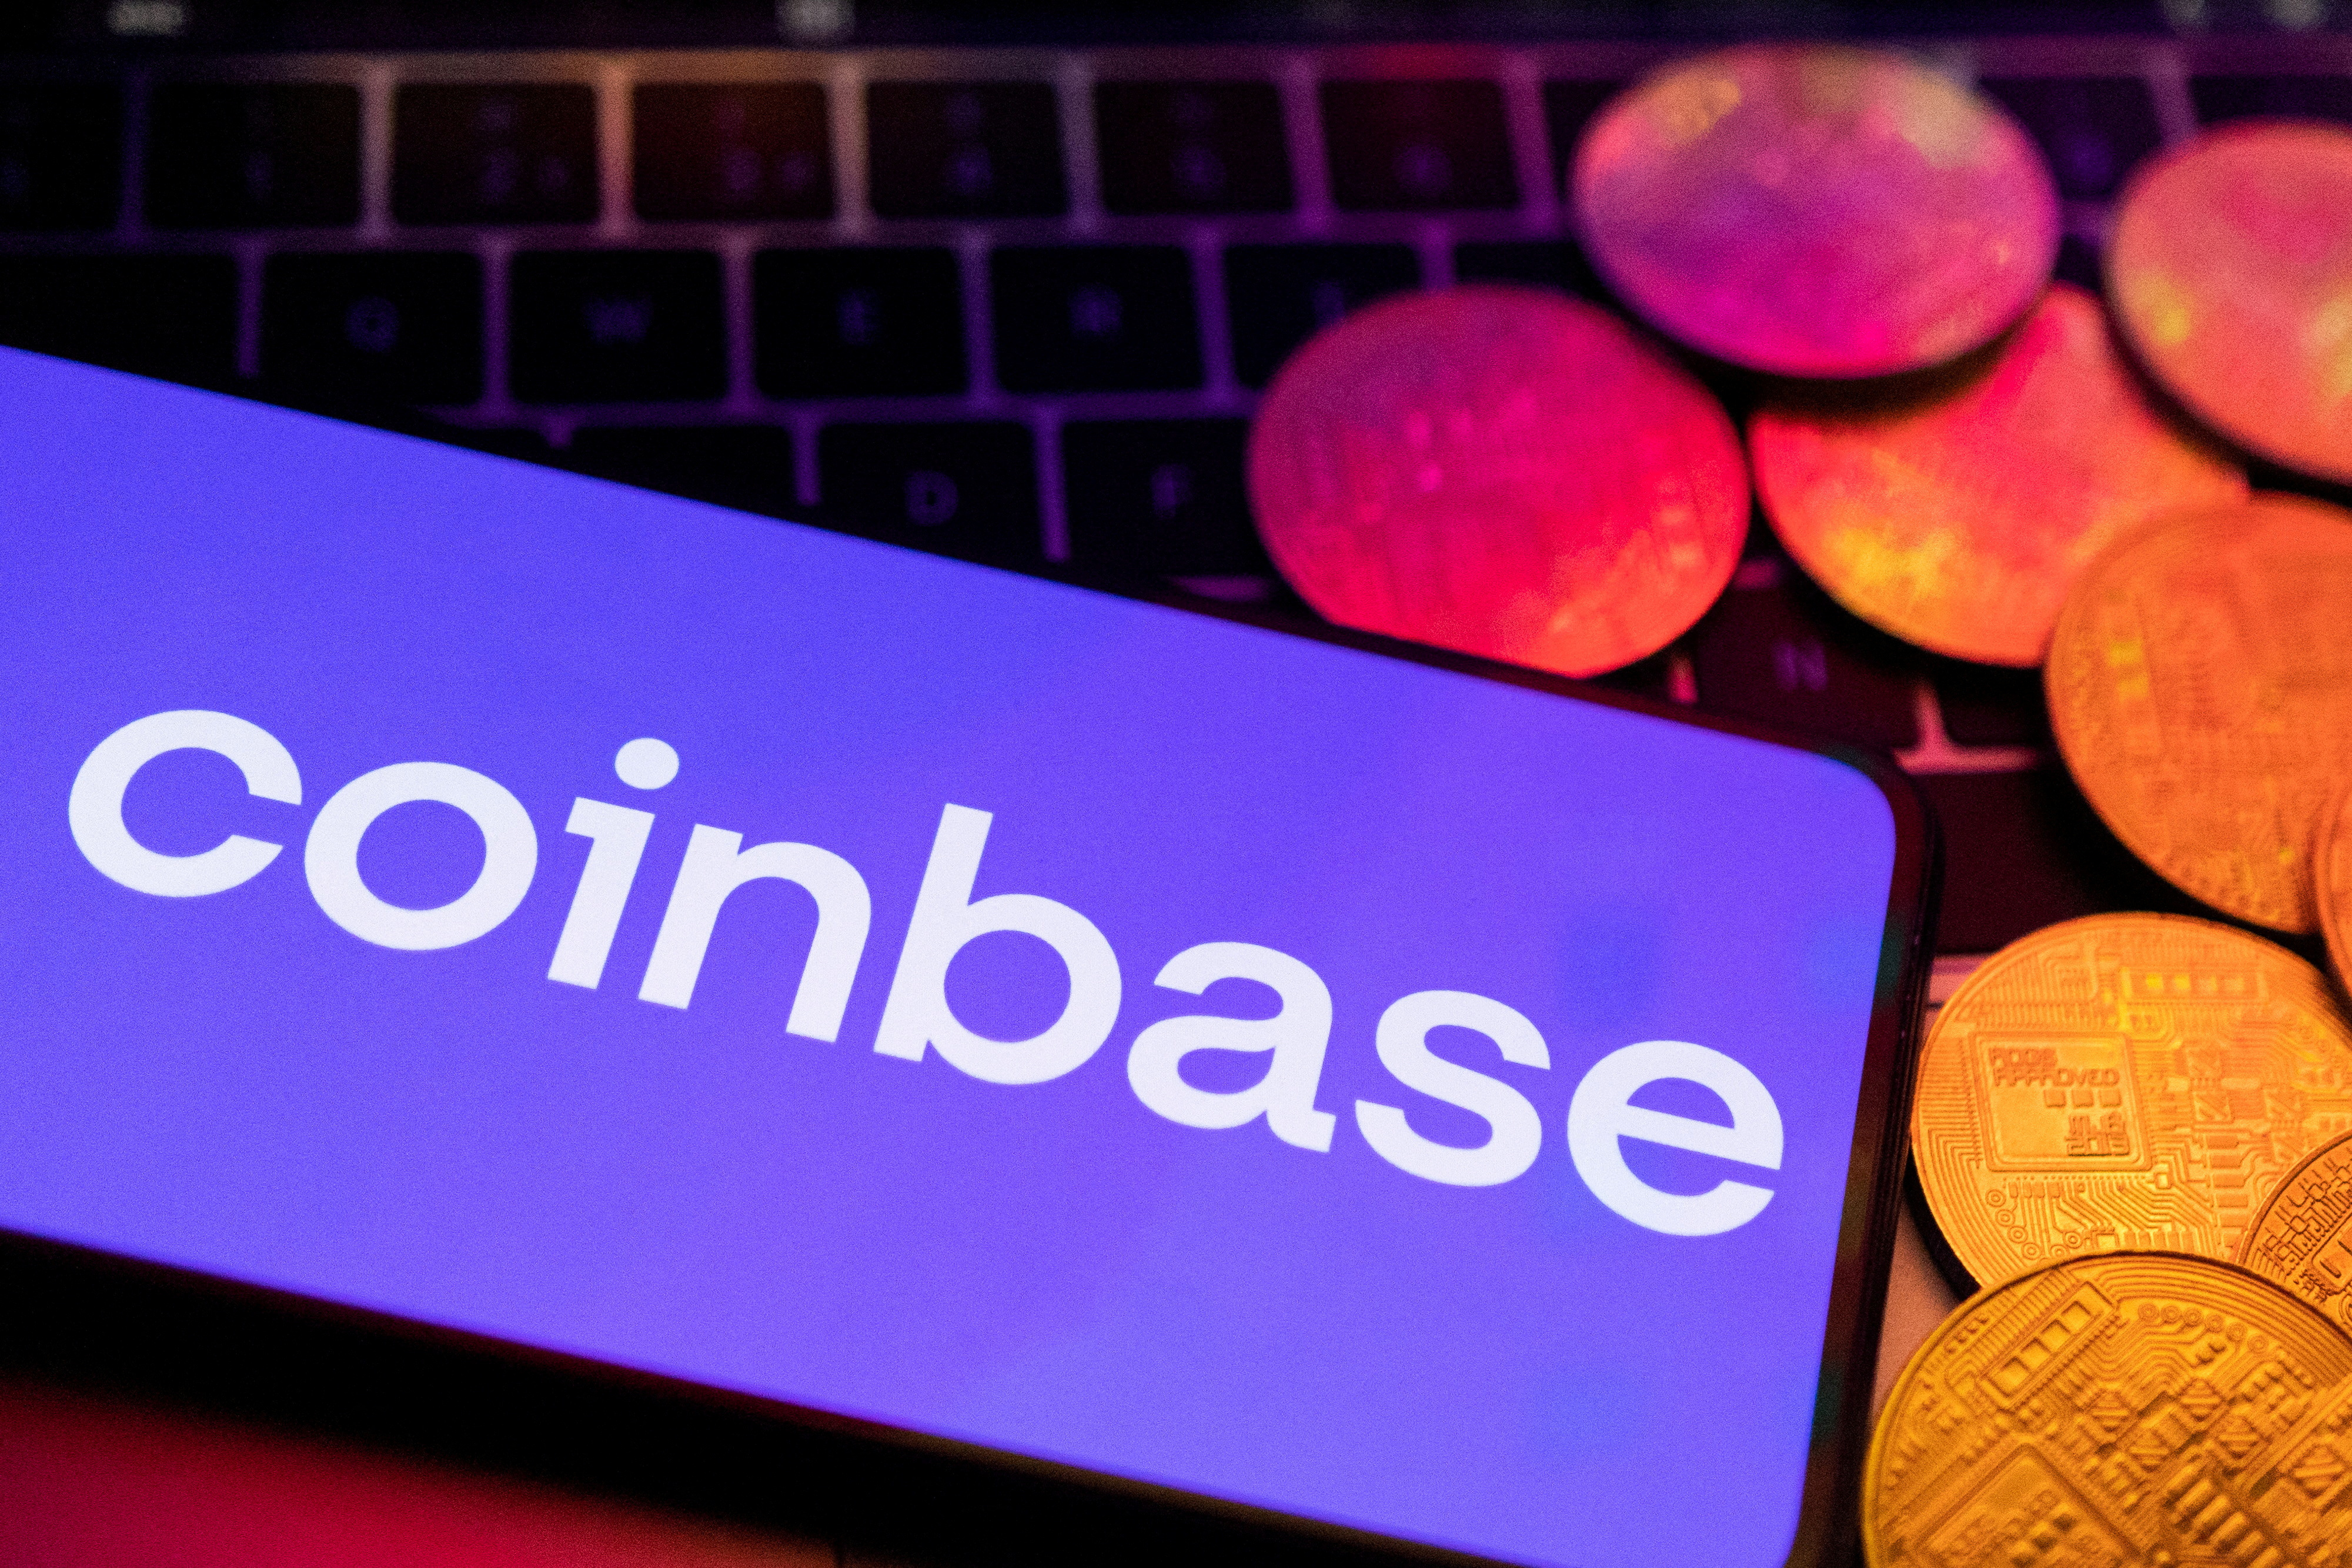 Ethereum Classic Finally gets Added to Coinbase